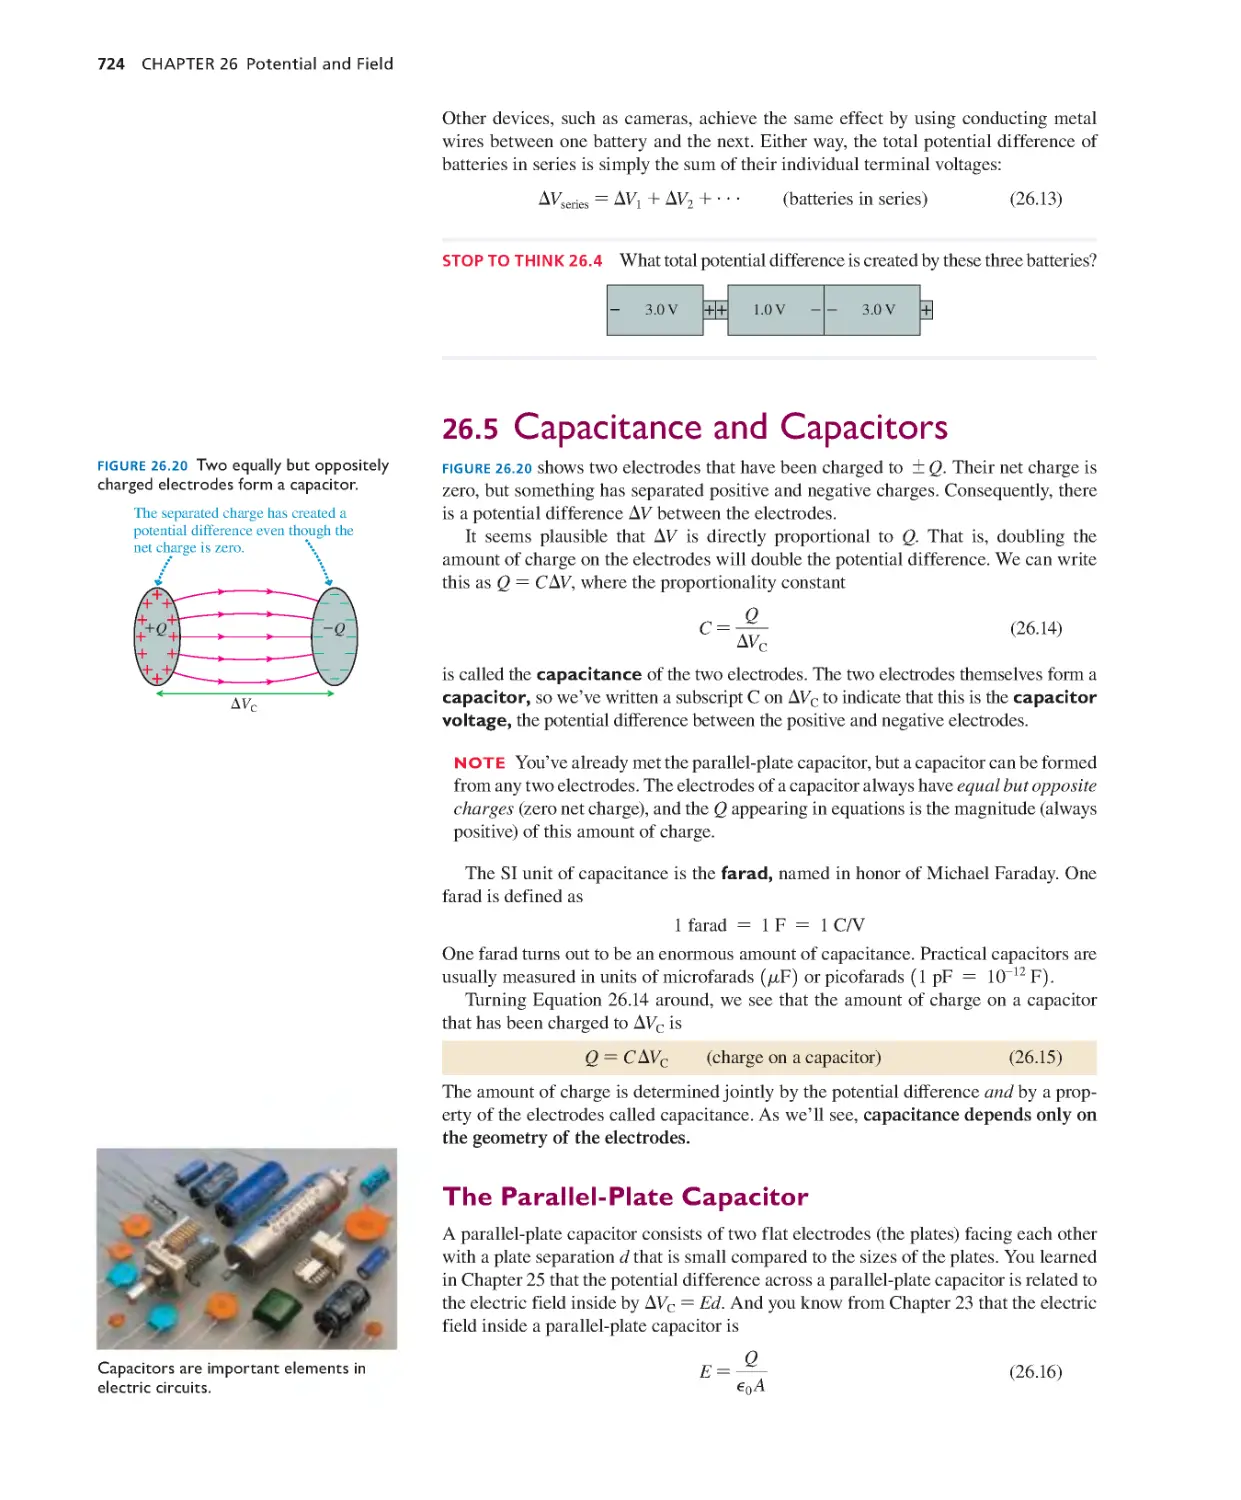 26.5. Capacitance and Capacitors